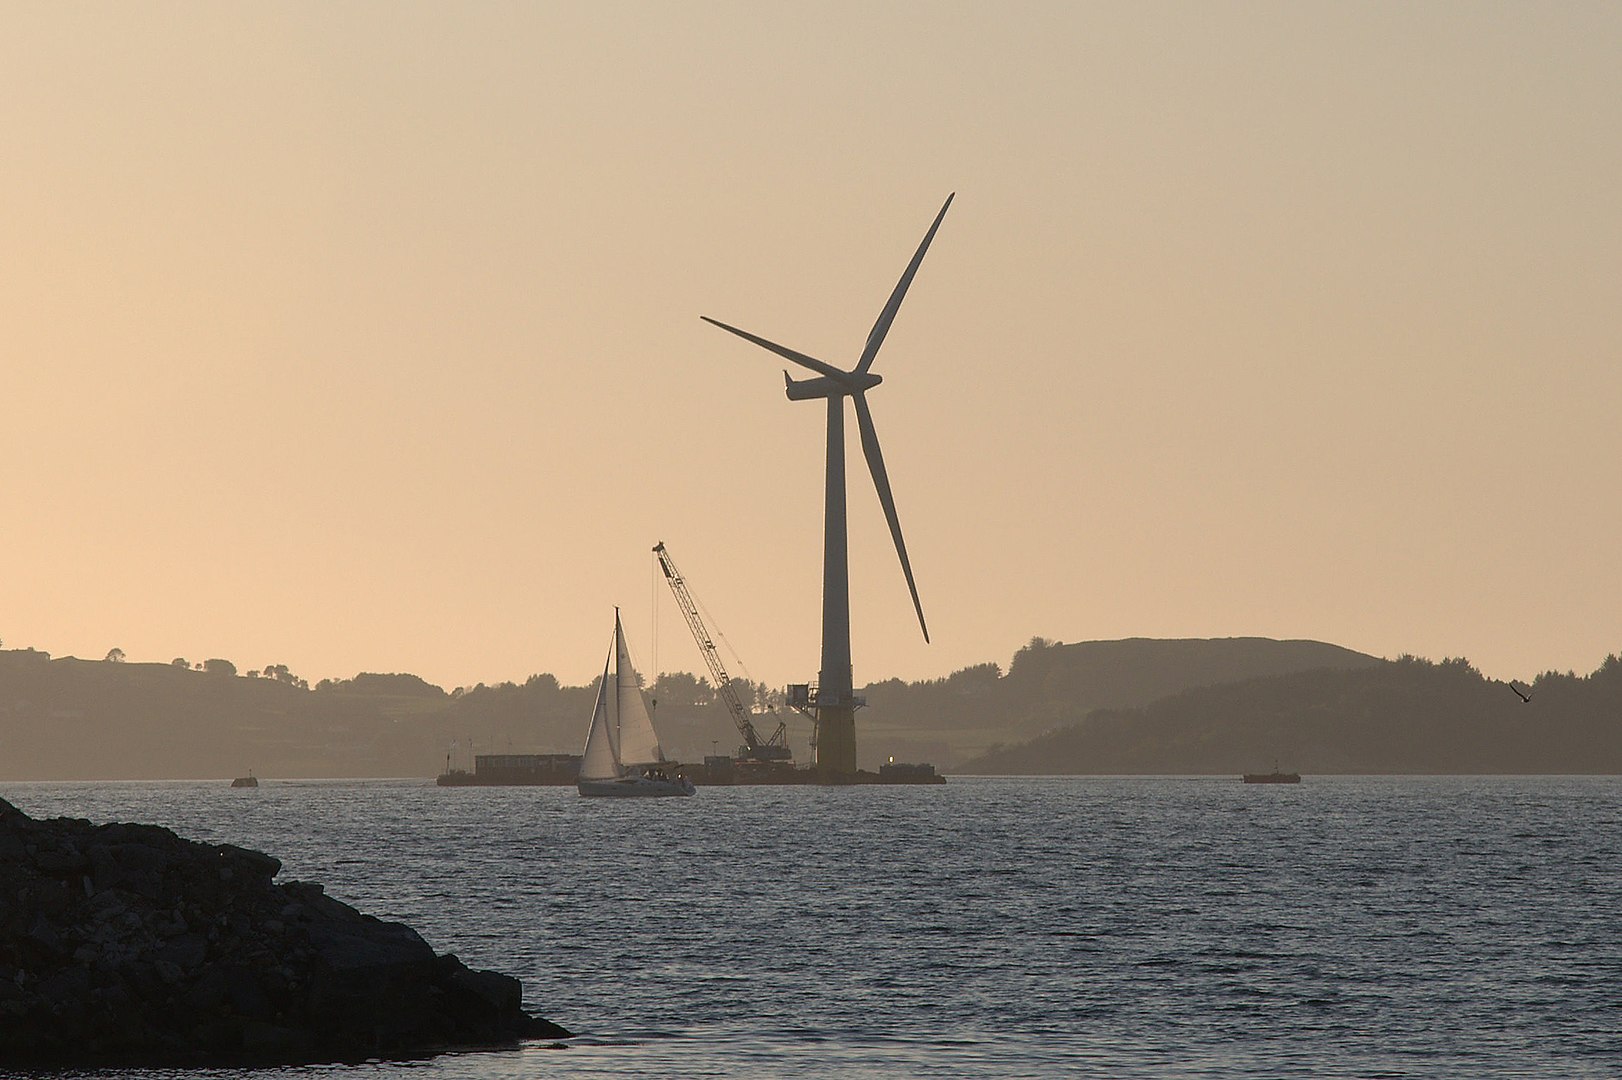 Silhouette of a wind turbine at dusk, with cranes and boats nearby, against a backdrop of a hilly coastline.